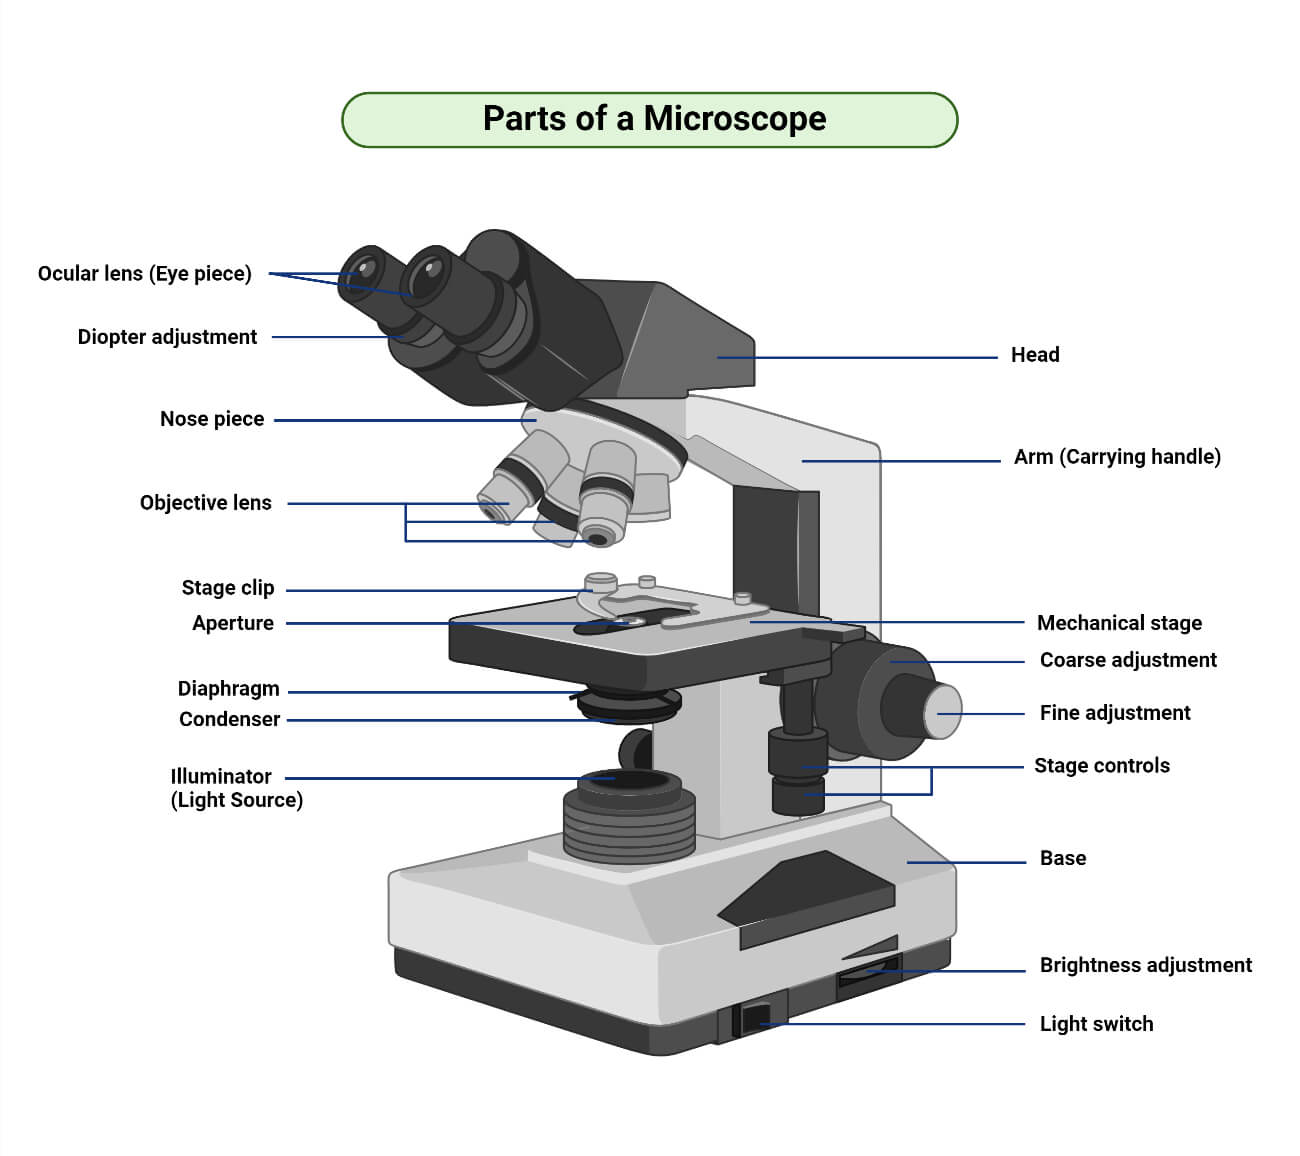 Parts of a Microscope with Functions